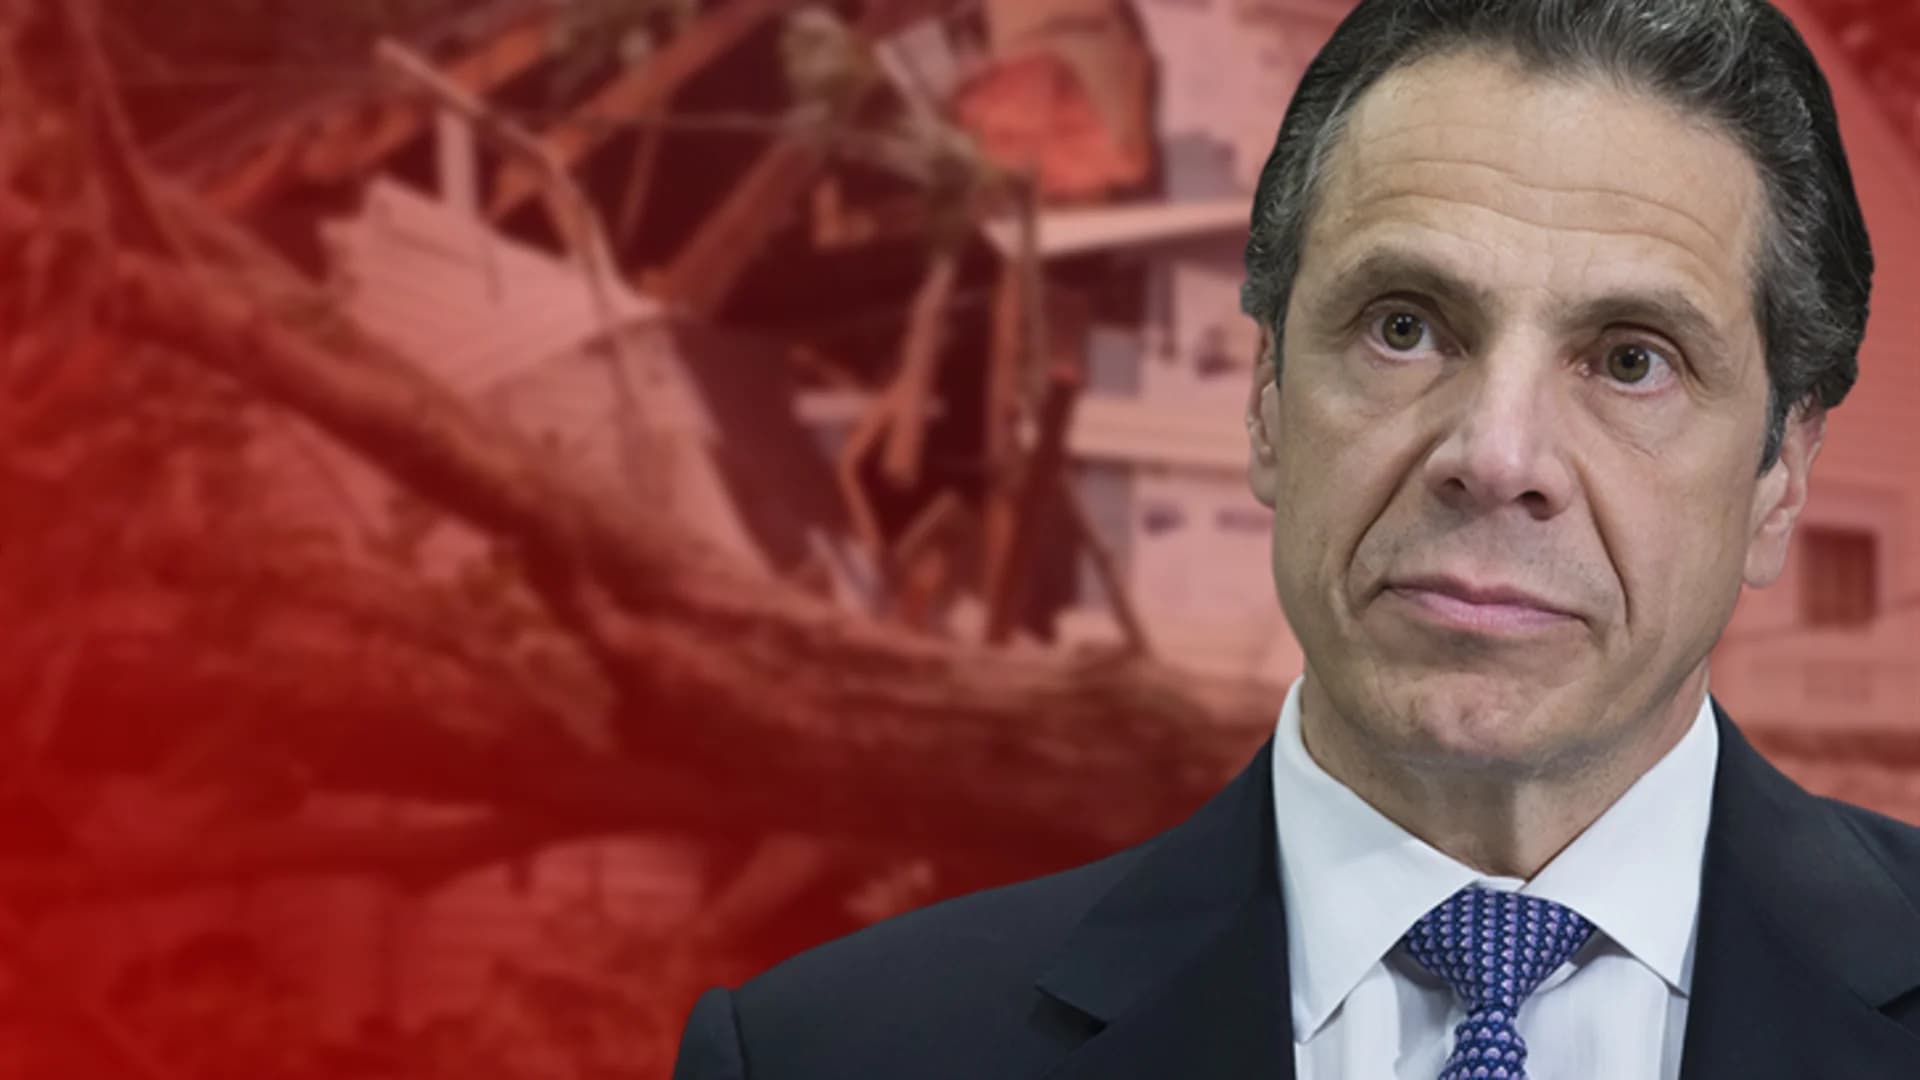 Gov. Cuomo declares state of emergency for NYC, Hudson Valley, LI counties in the wake of Isaias